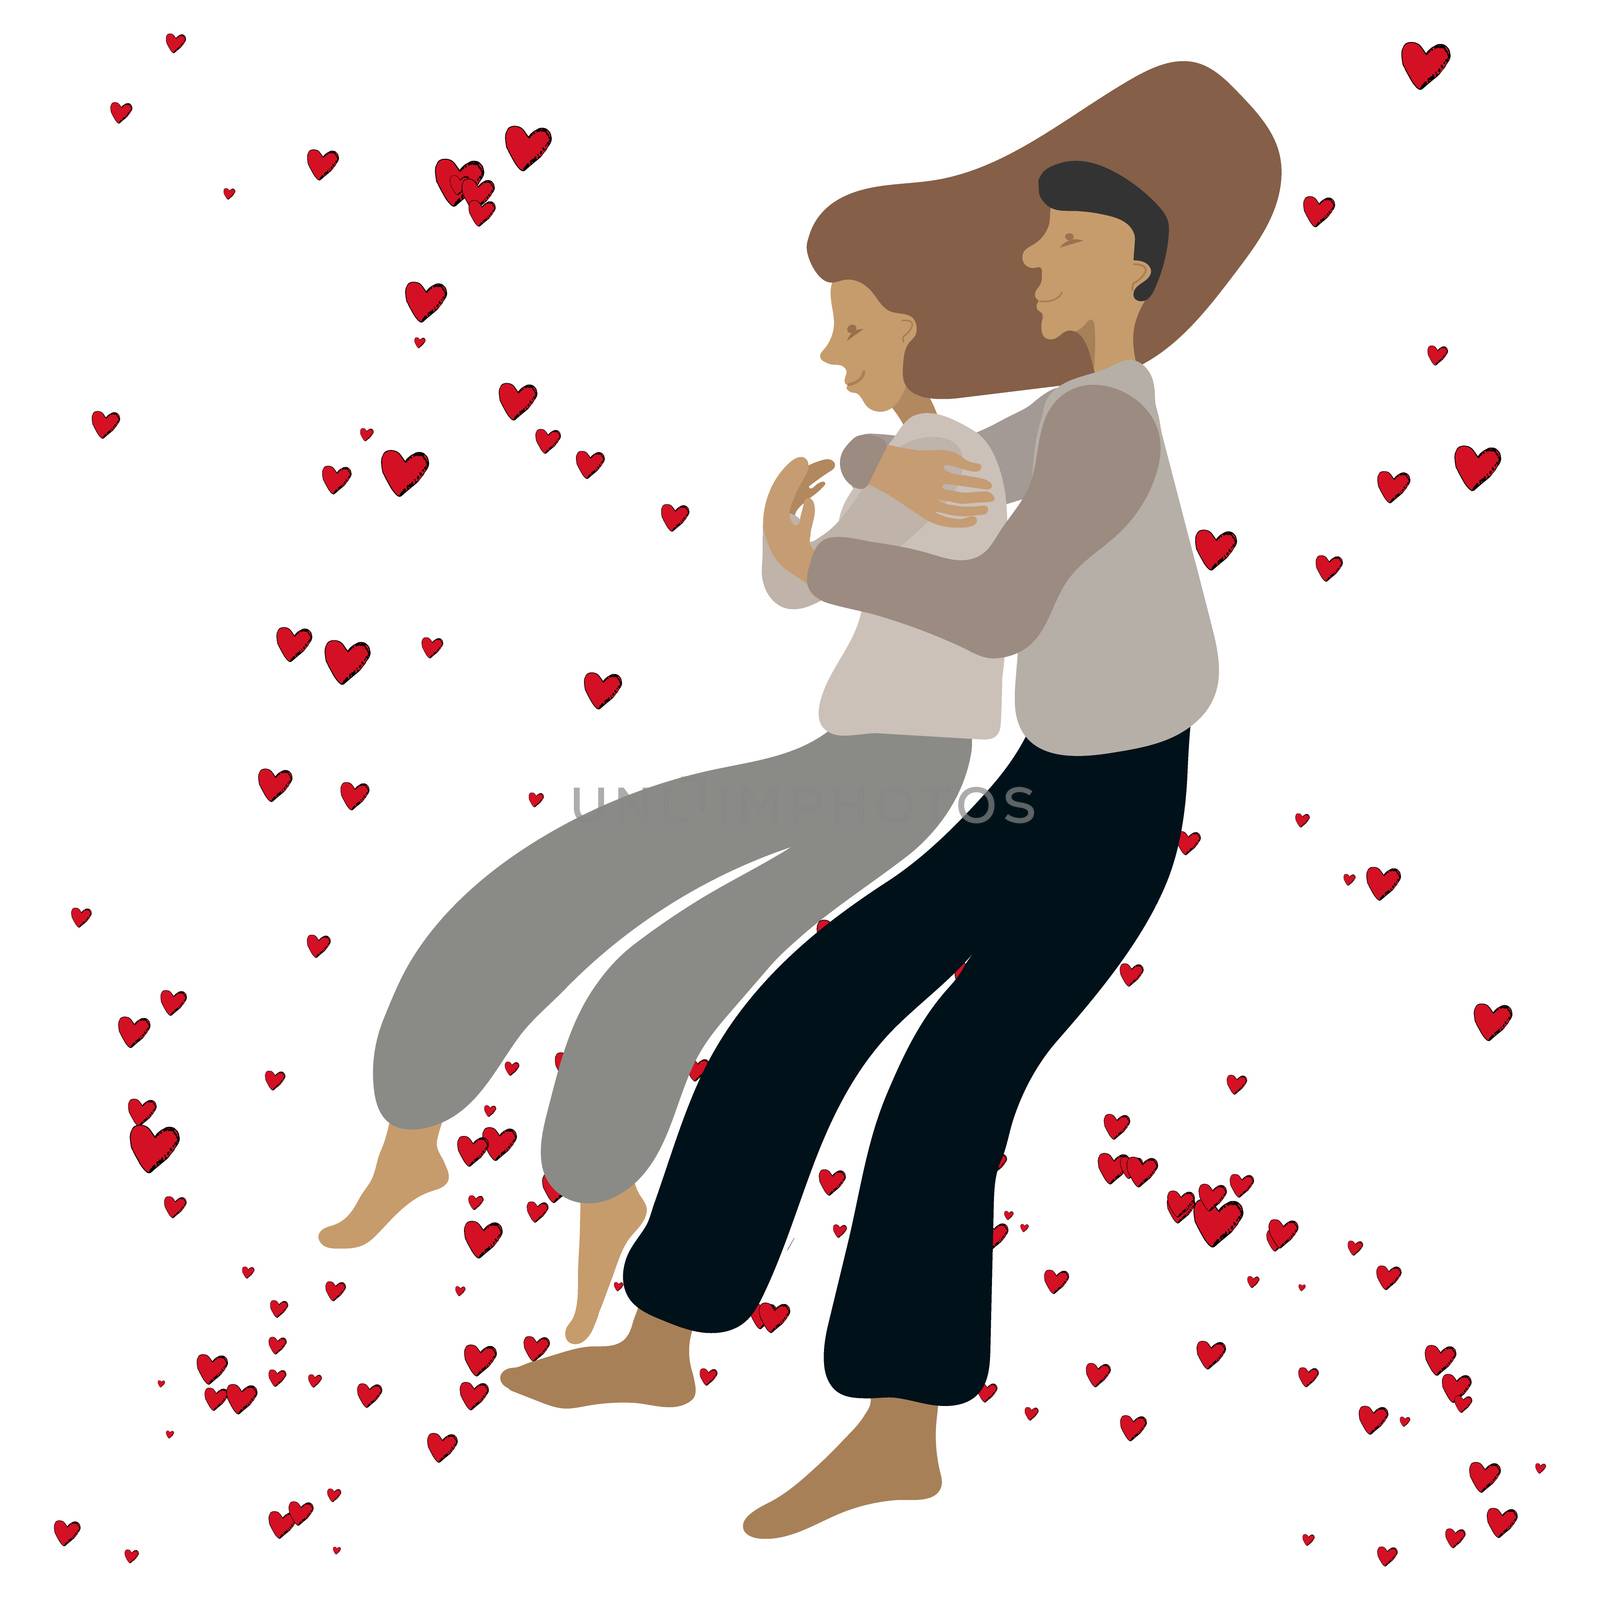 Romantic couple cuddling. Vector colorful illustration on white background with red hearts.